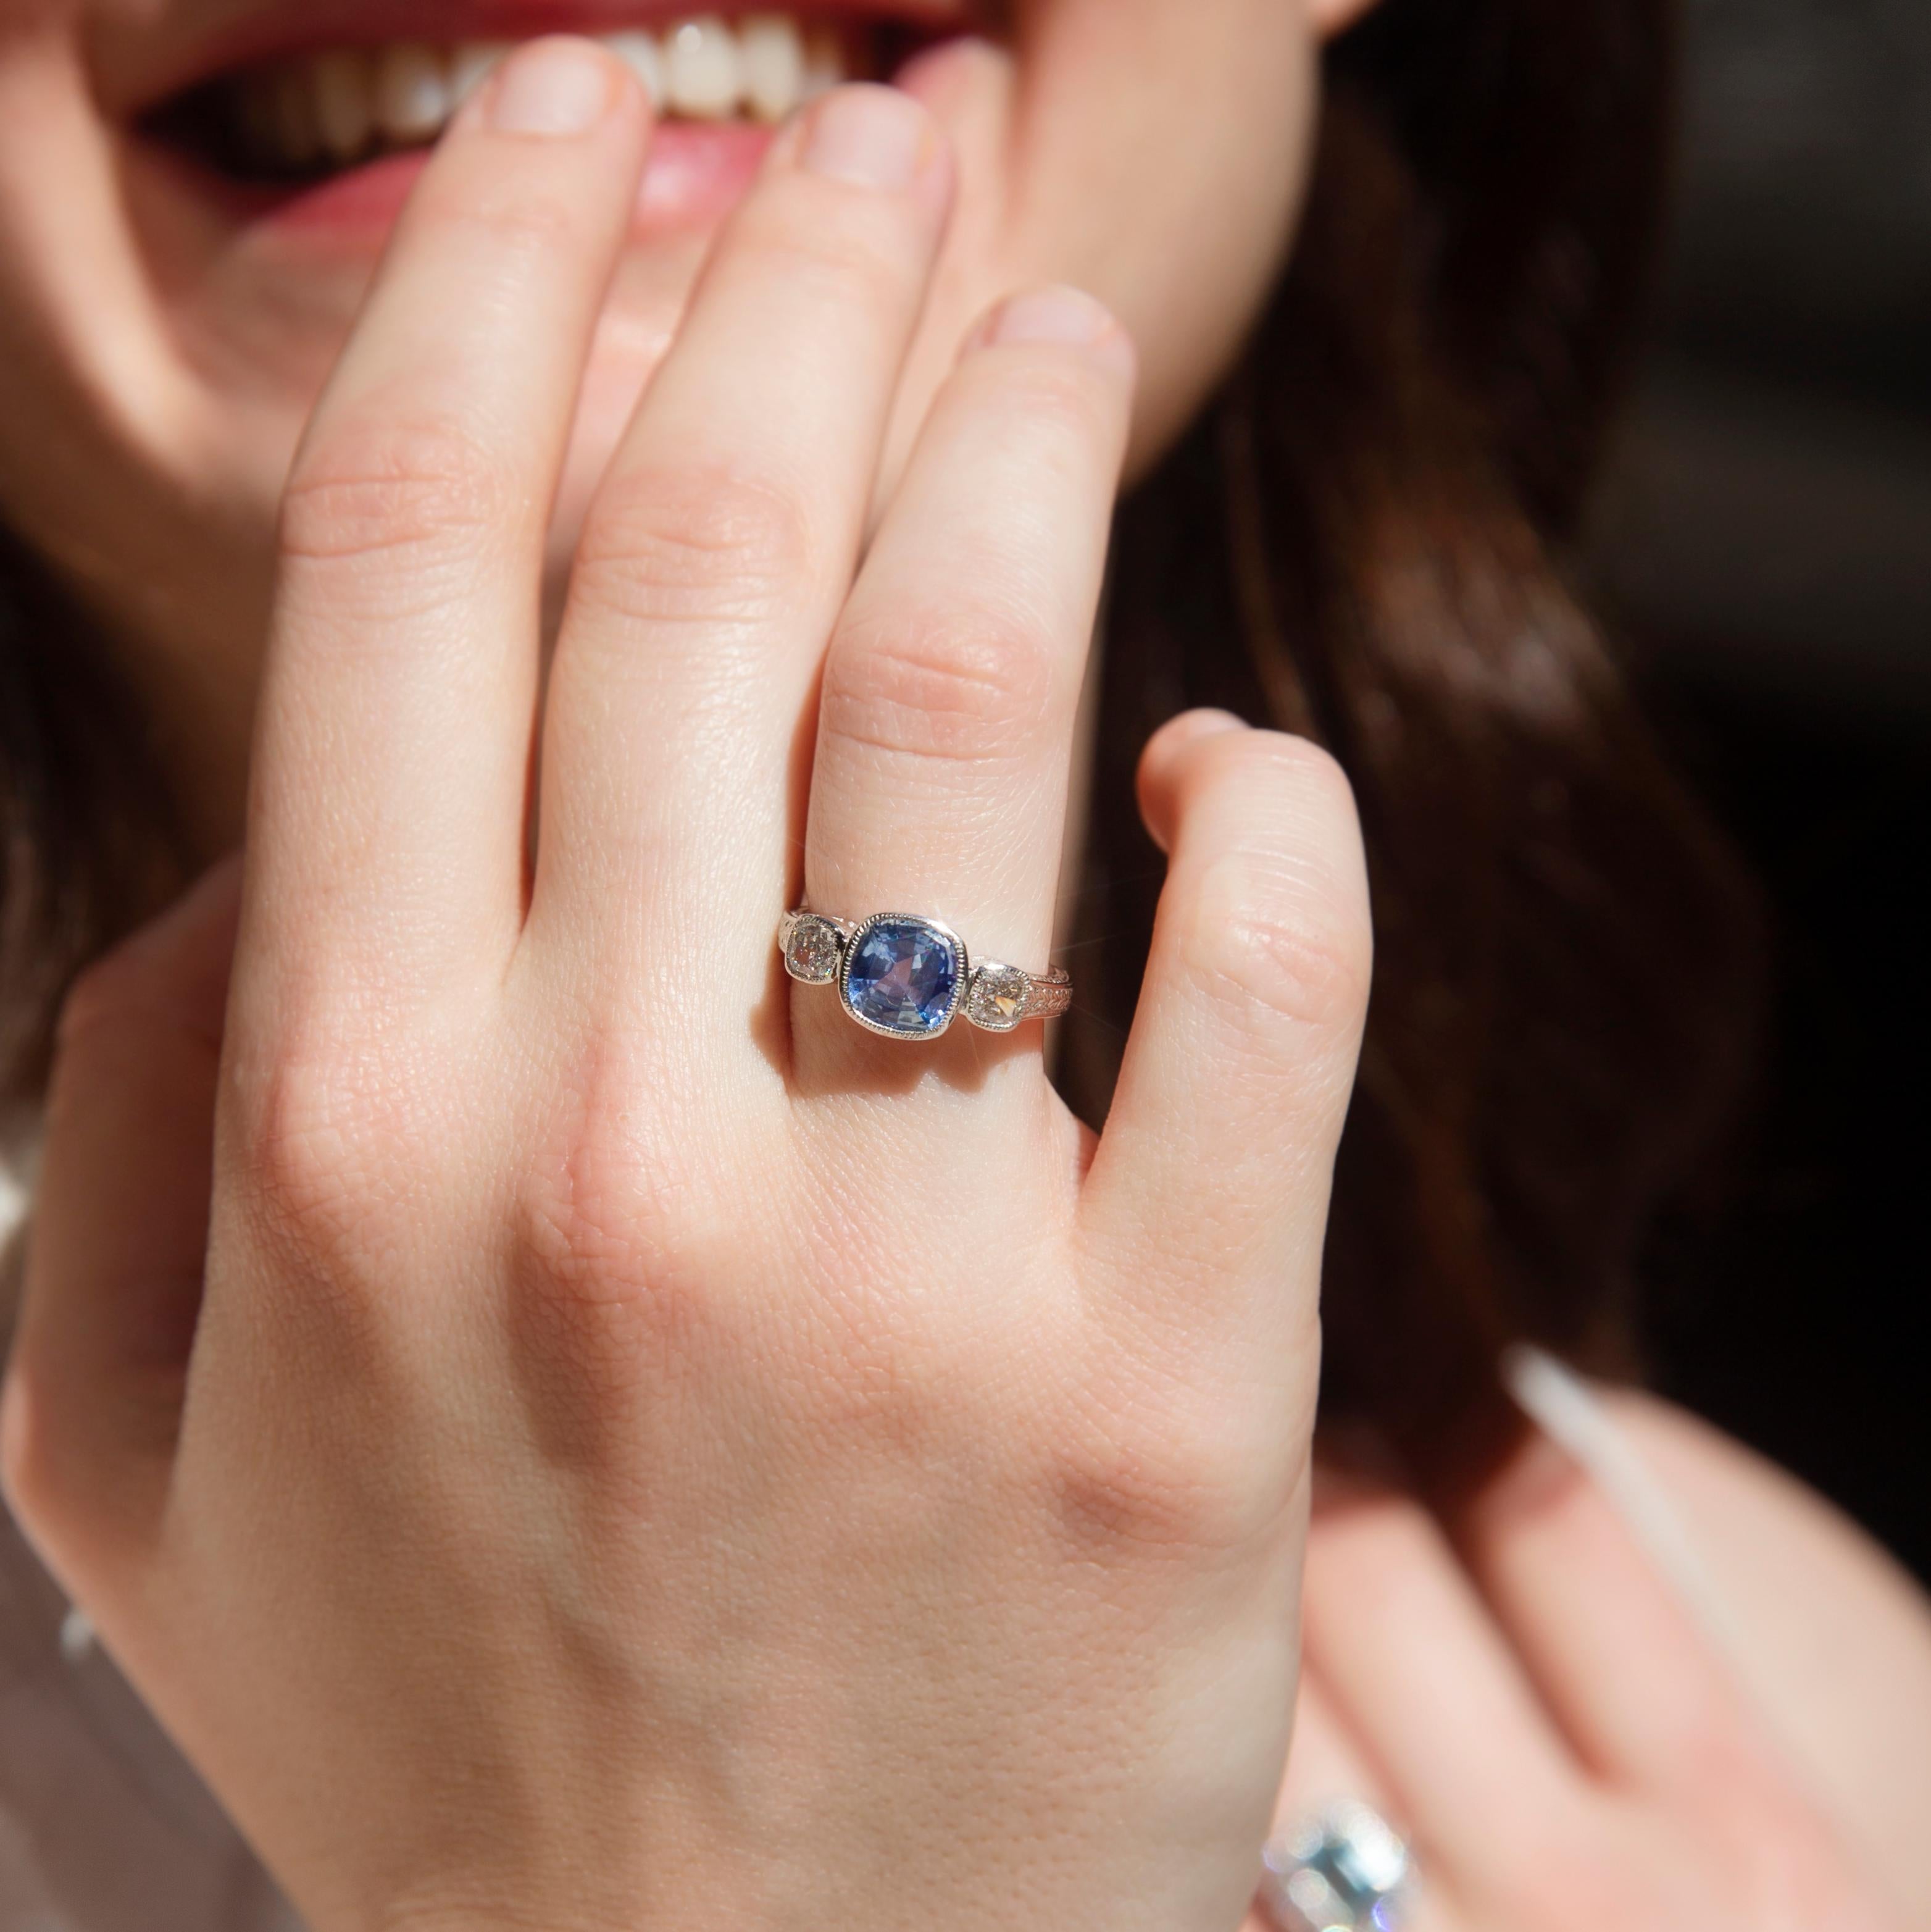 Forged with care in shimmering platinum, this fabulous three stone milgrain ring holds a gorgeous cushion-shaped blue sapphire flanked by a perfect duo of cushion cut diamonds glistening in unison. Her name is The Persida Ring. The harmony of